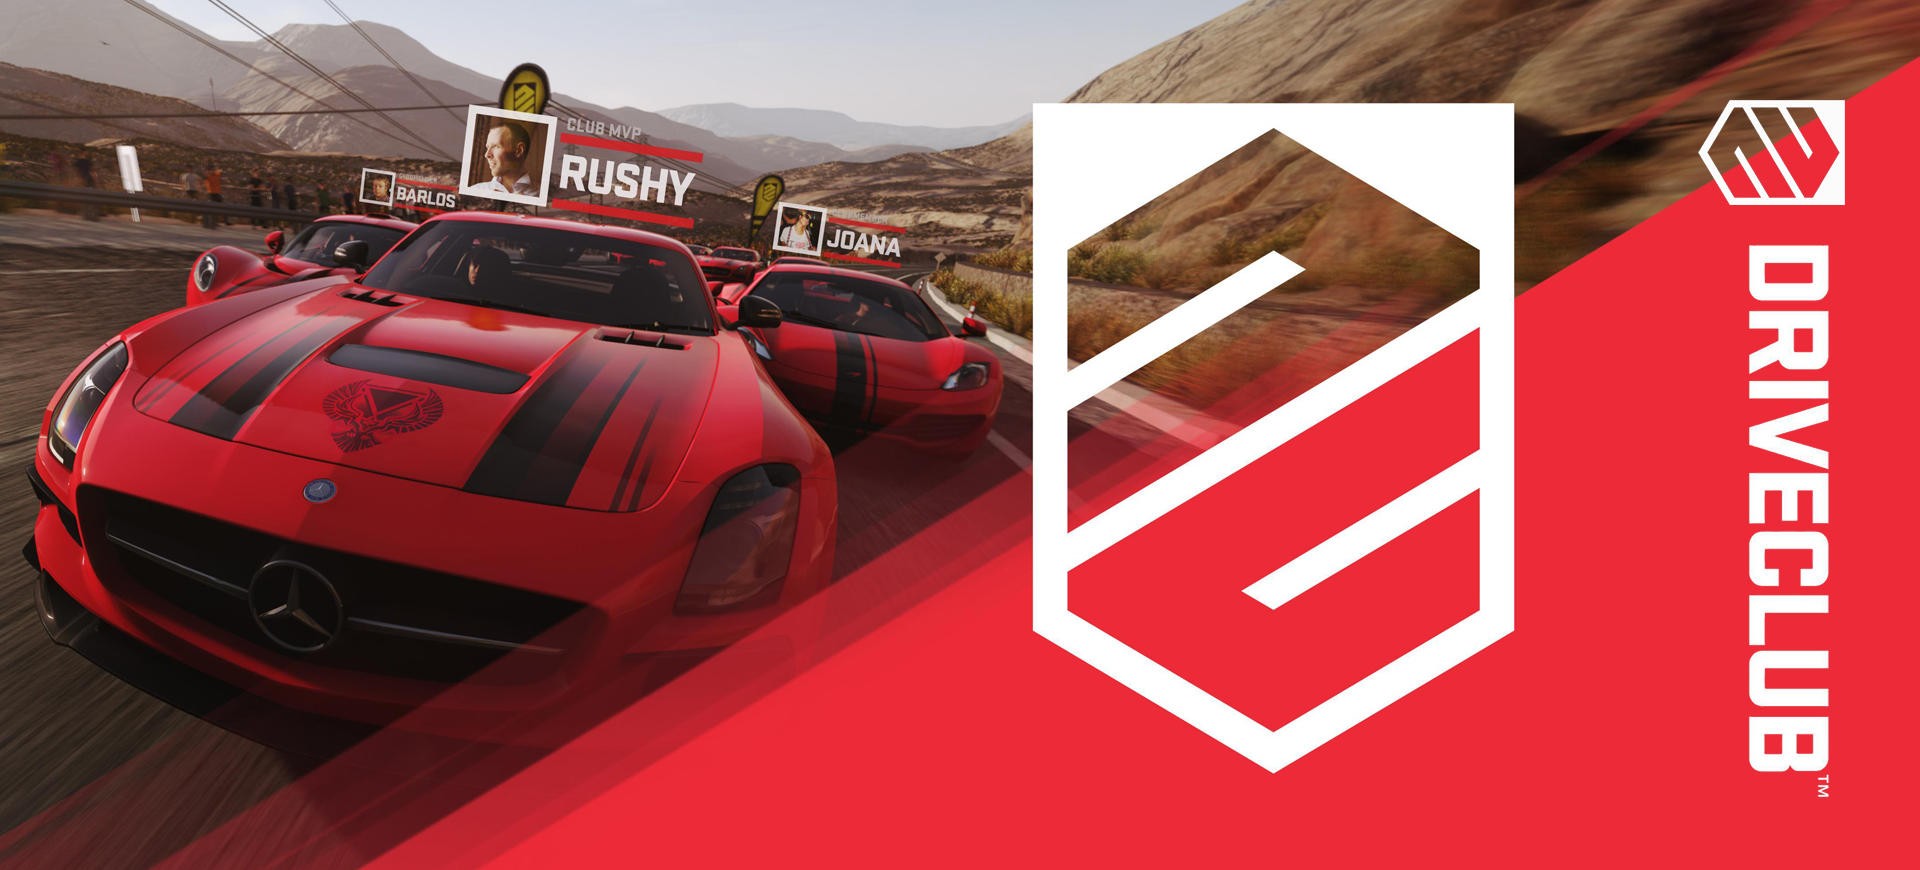 driveclub-playstations-plus-edition-se-duoc-phat-hanh-vao-ngay-mai-2